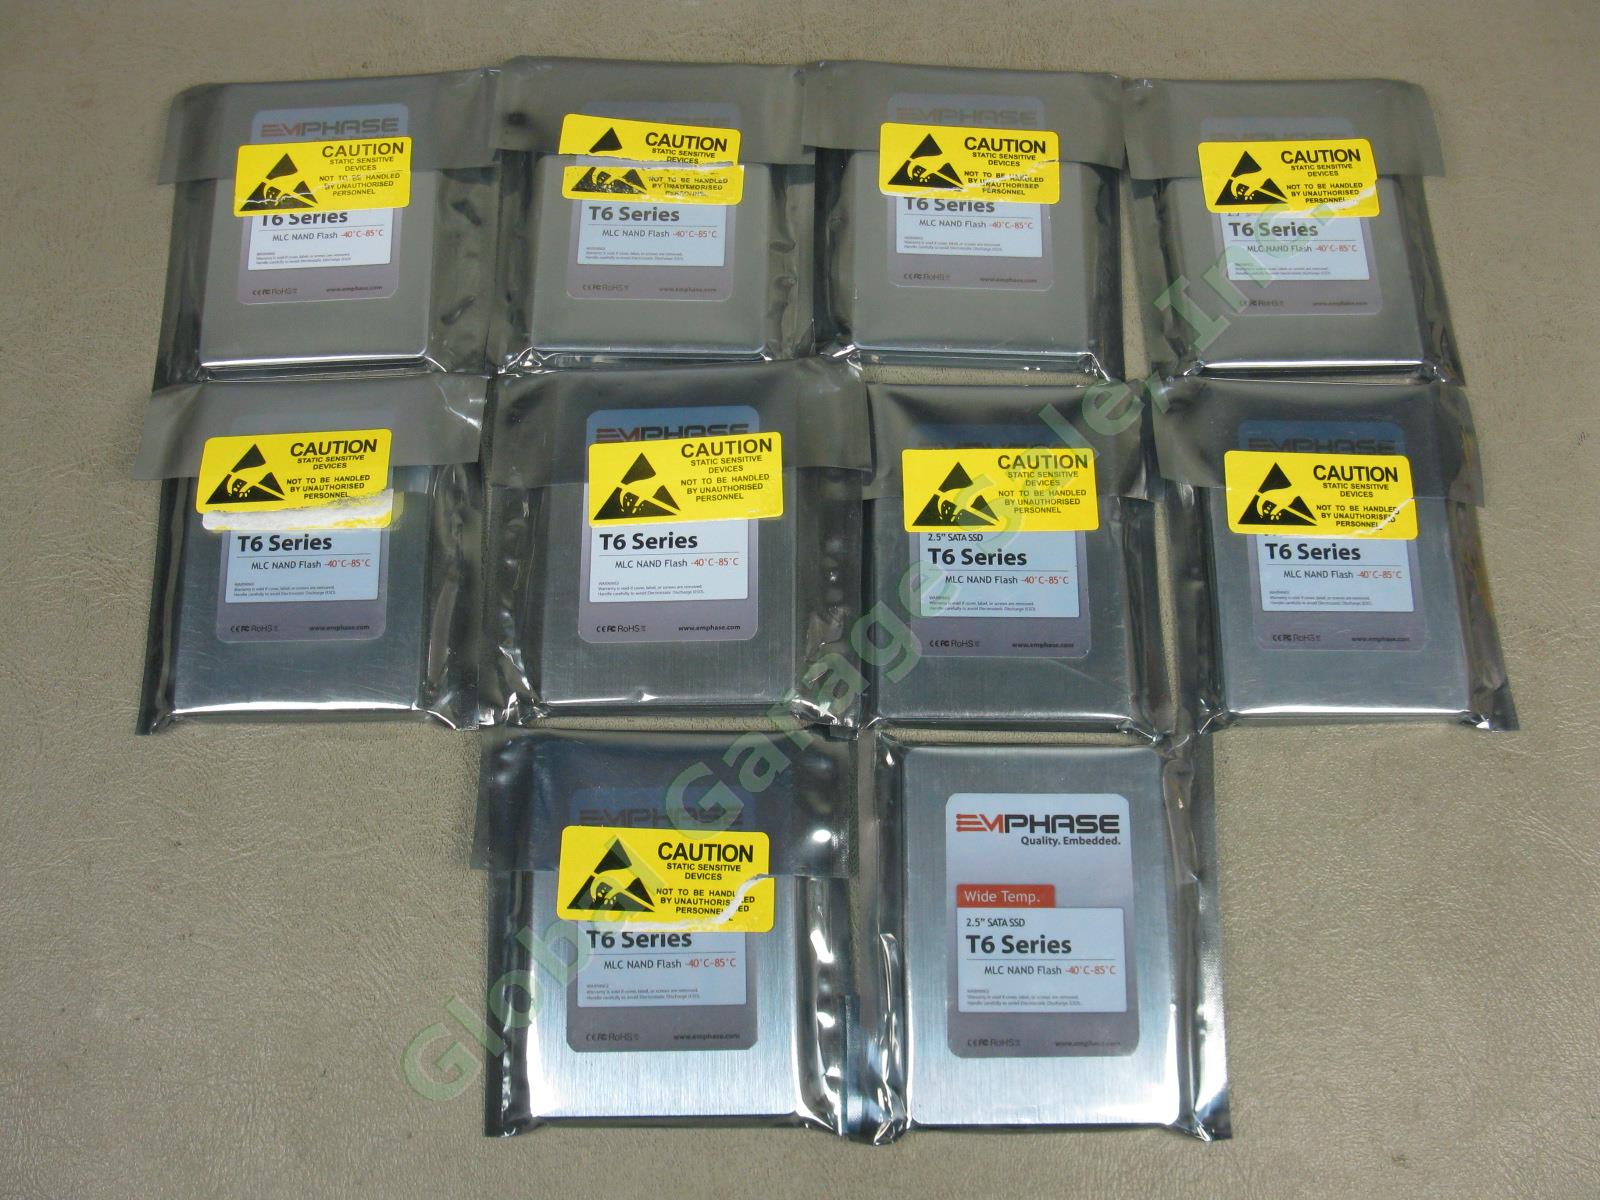 10 NEW Emphase T6 2.5" MLC NAND 60GB SSD Industrial Temperature Hard Drive Lot